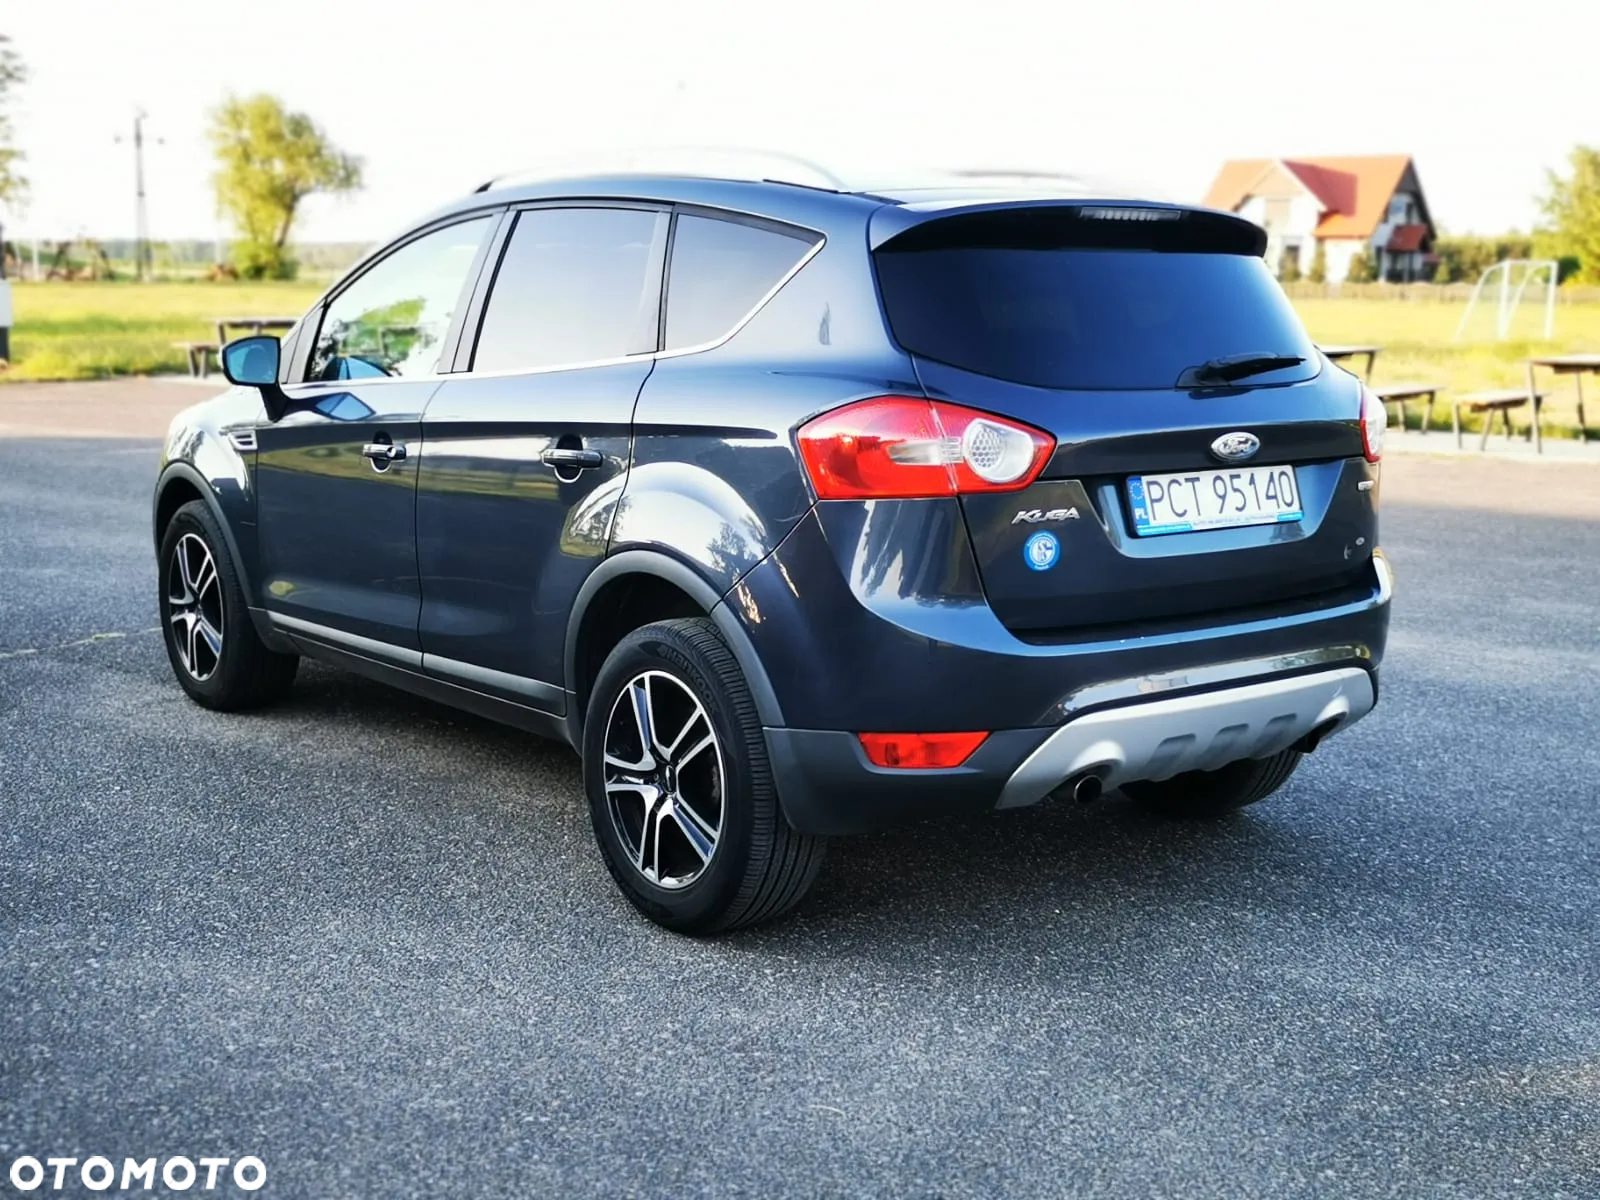 Ford Kuga 2.0 TDCi Trend FWD - 12